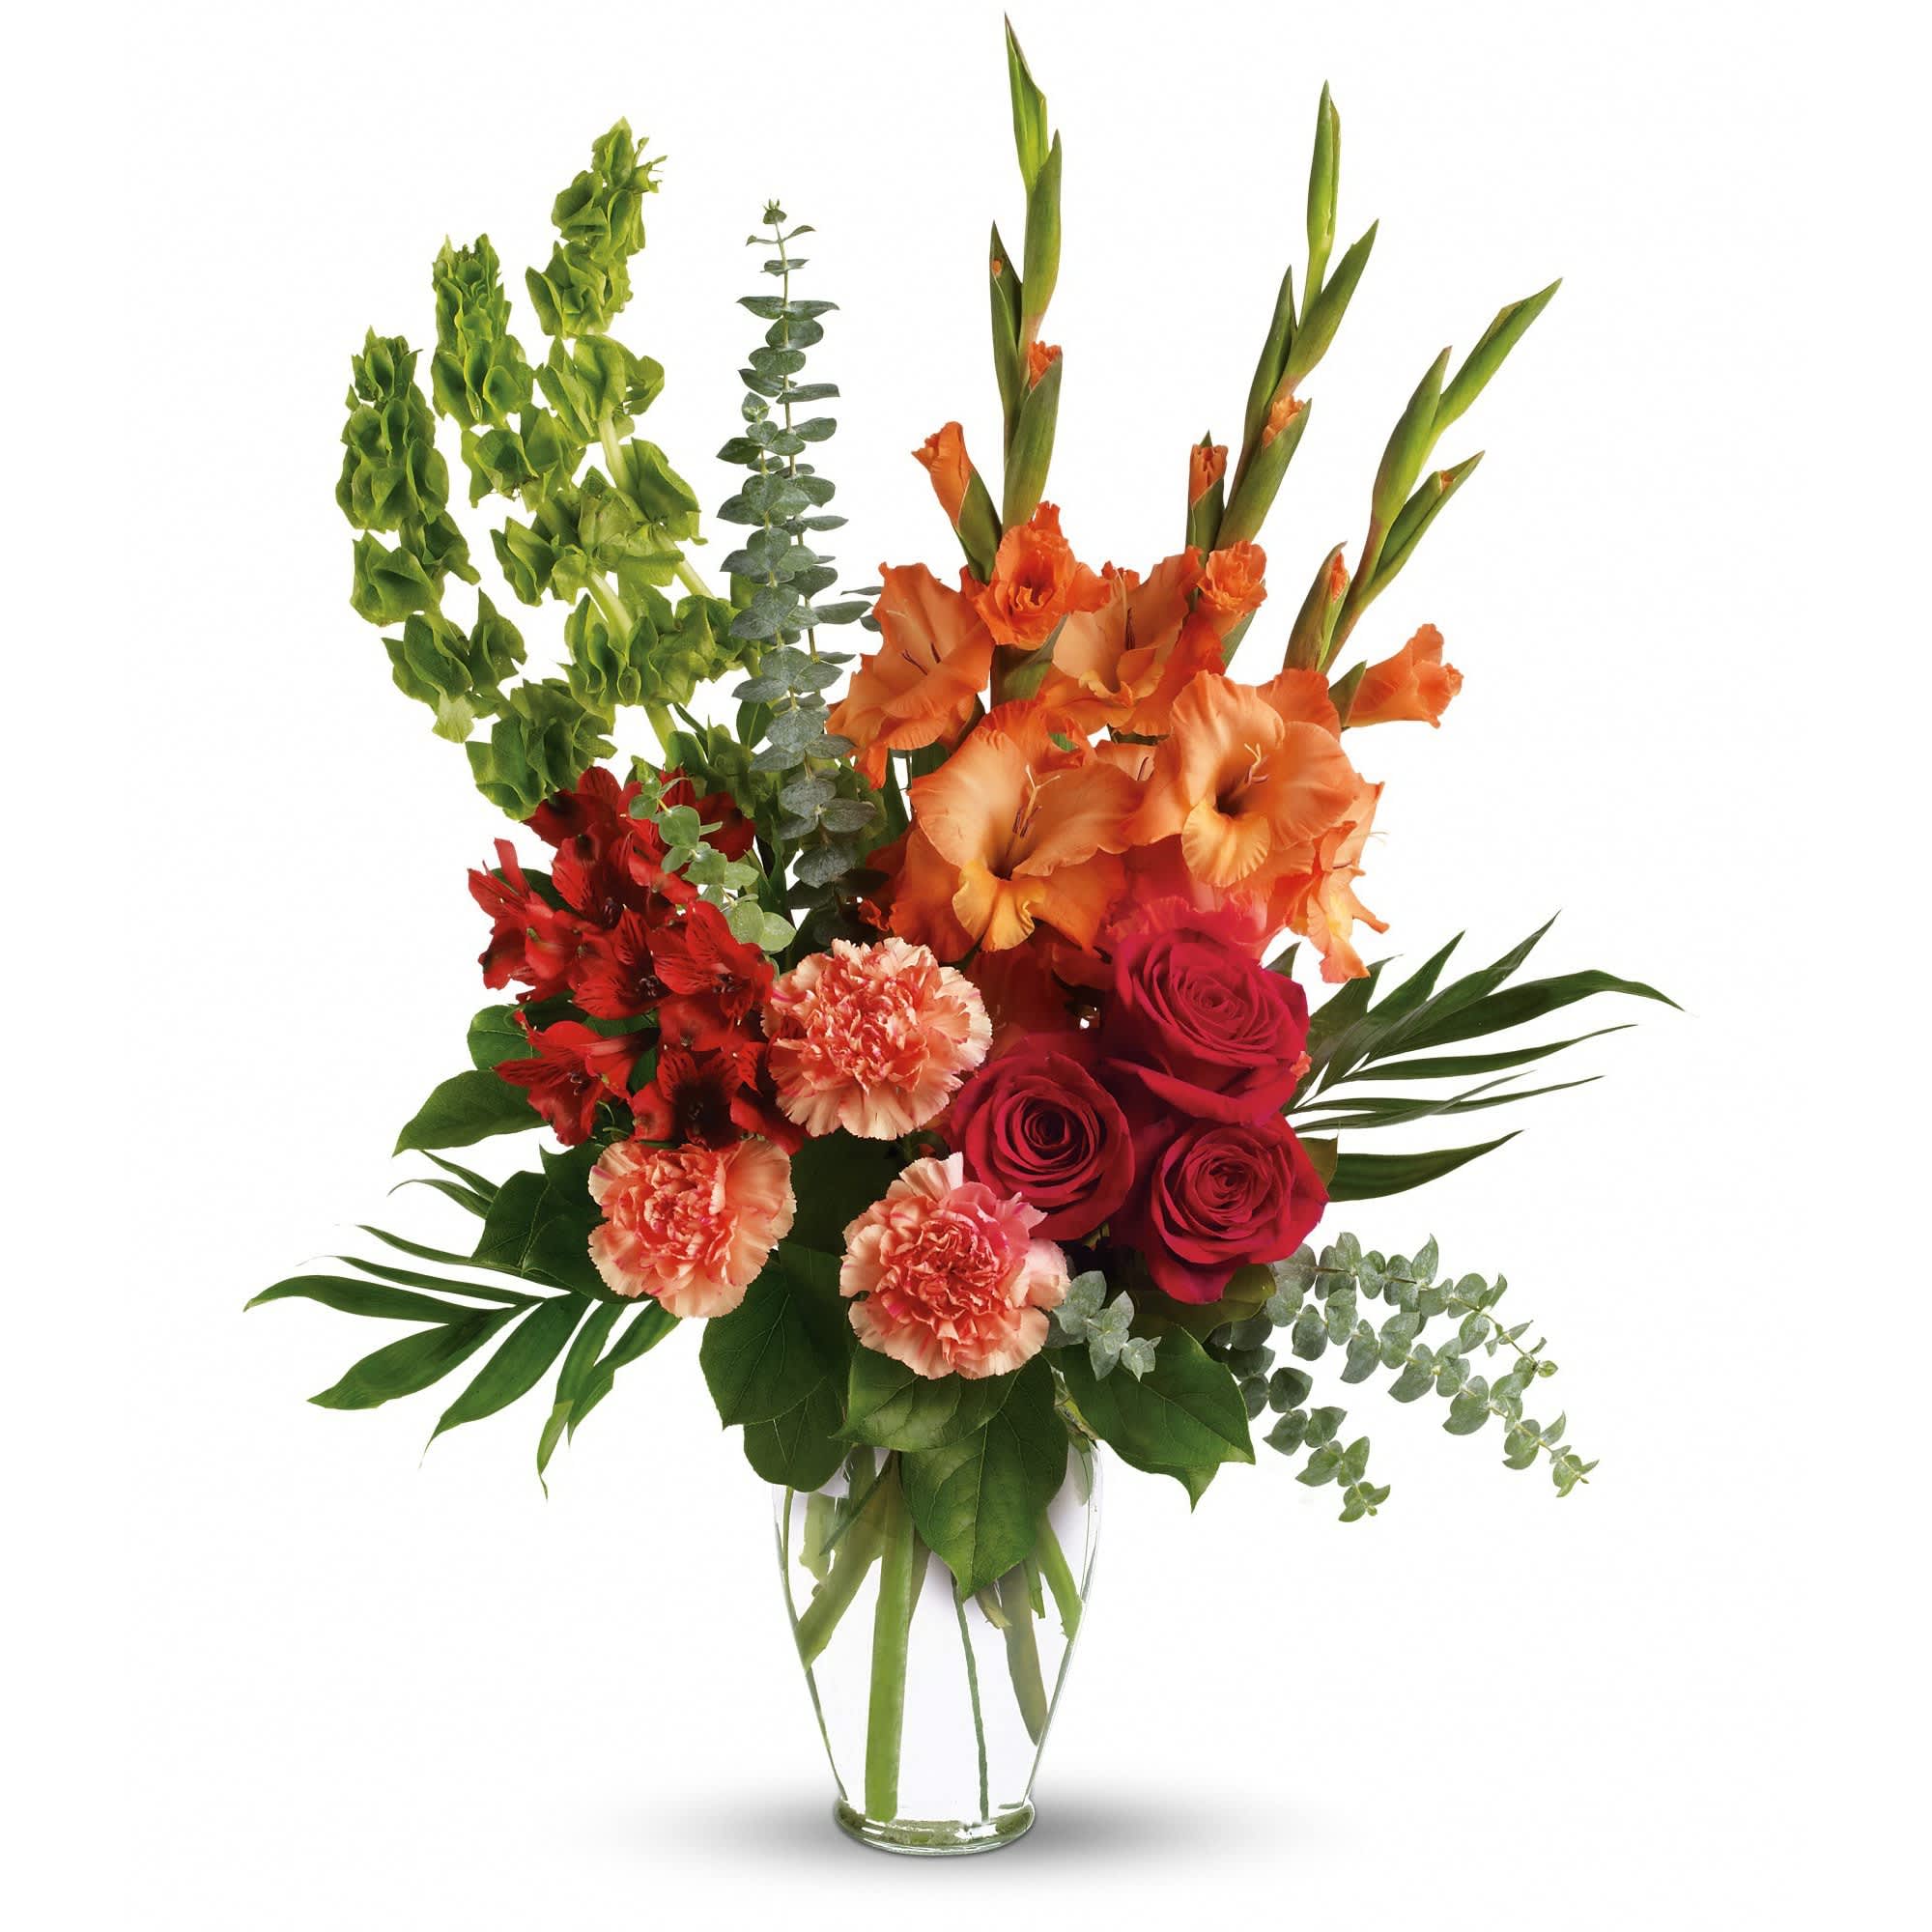 Days of Sunshine Bouquet by Teleflora - Red roses, red alstroemeria and orange gladioli in a sparkling Ming urn - a lovely tribute that sends a message of hope and healing for those mourning their loss.  